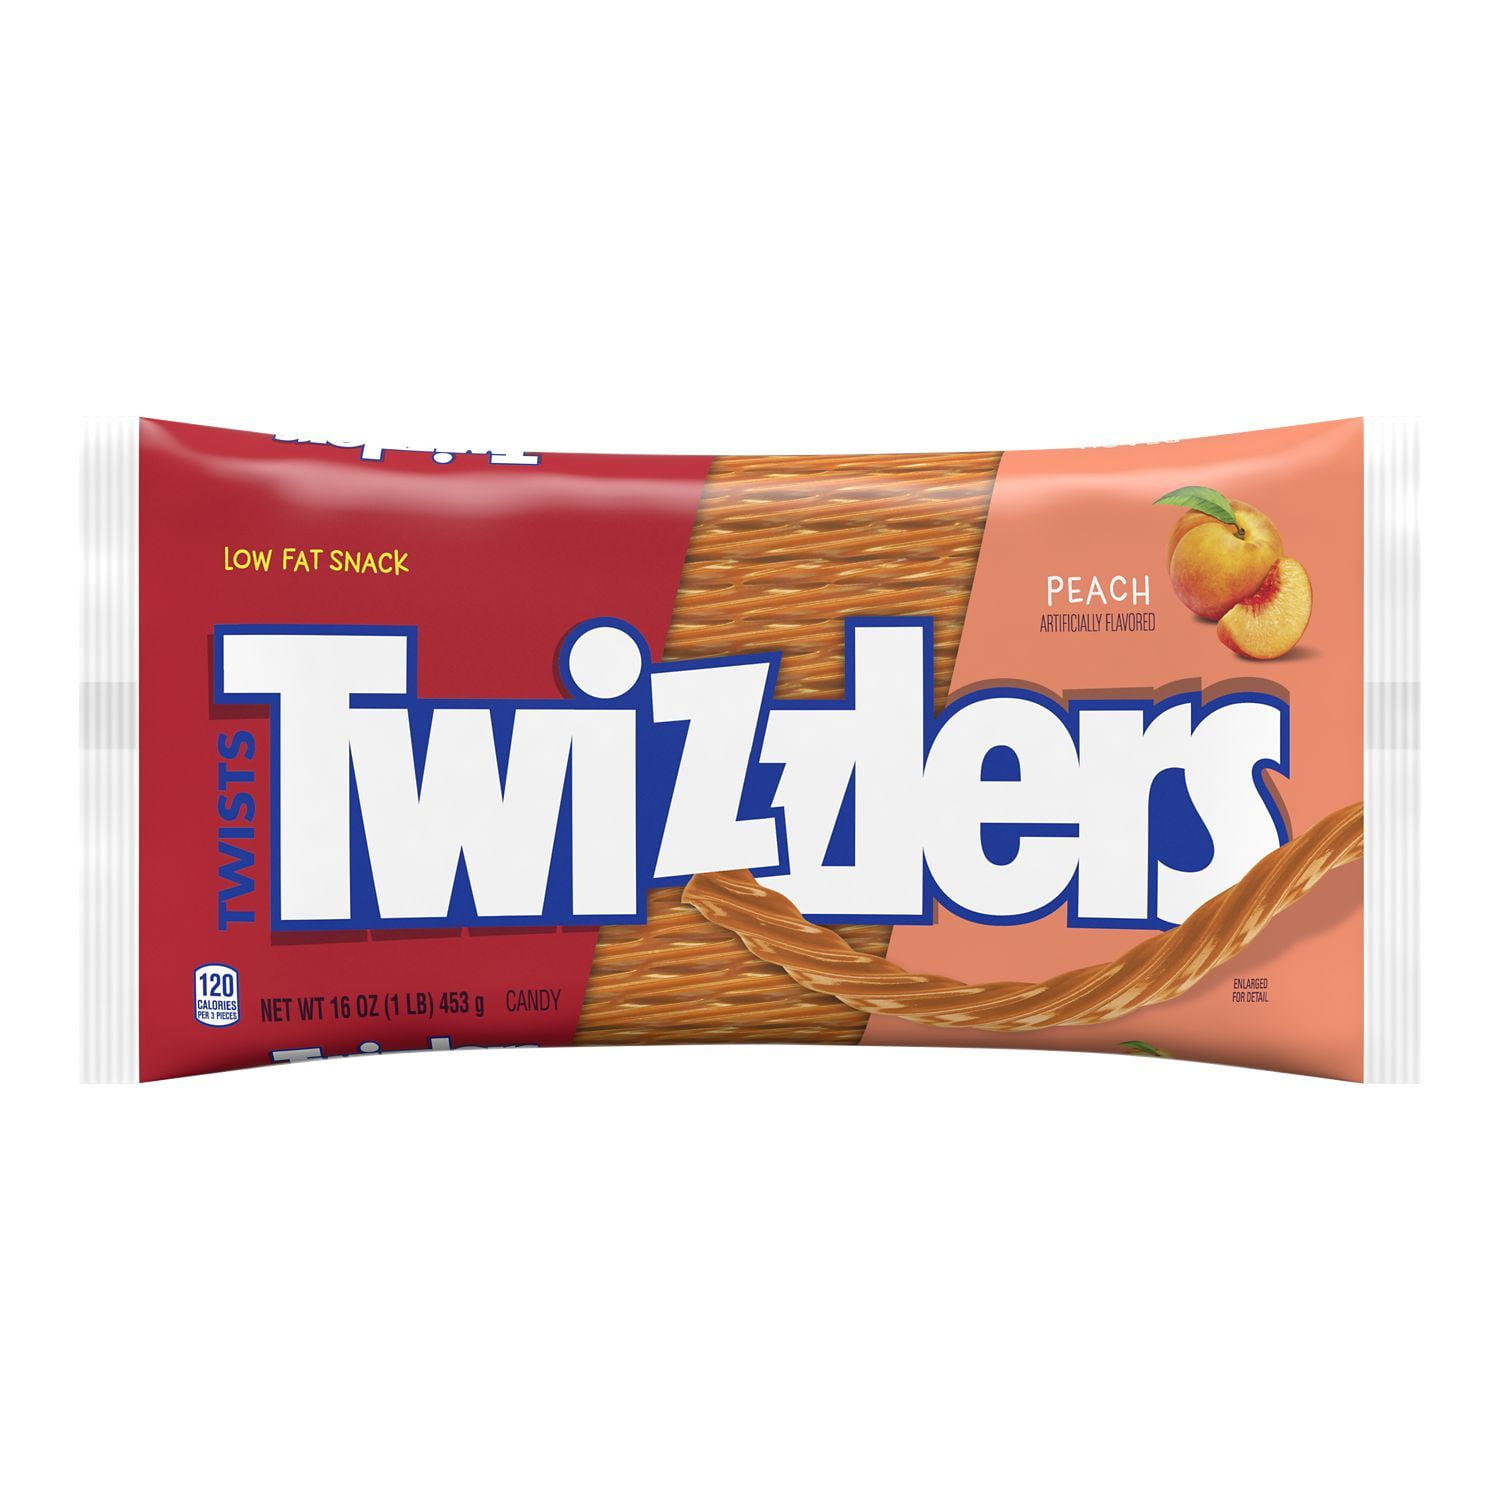 TWIZZLERS, Twists Peach Flavored Chewy Candy, Low Fat Snack, 16 oz, Bag